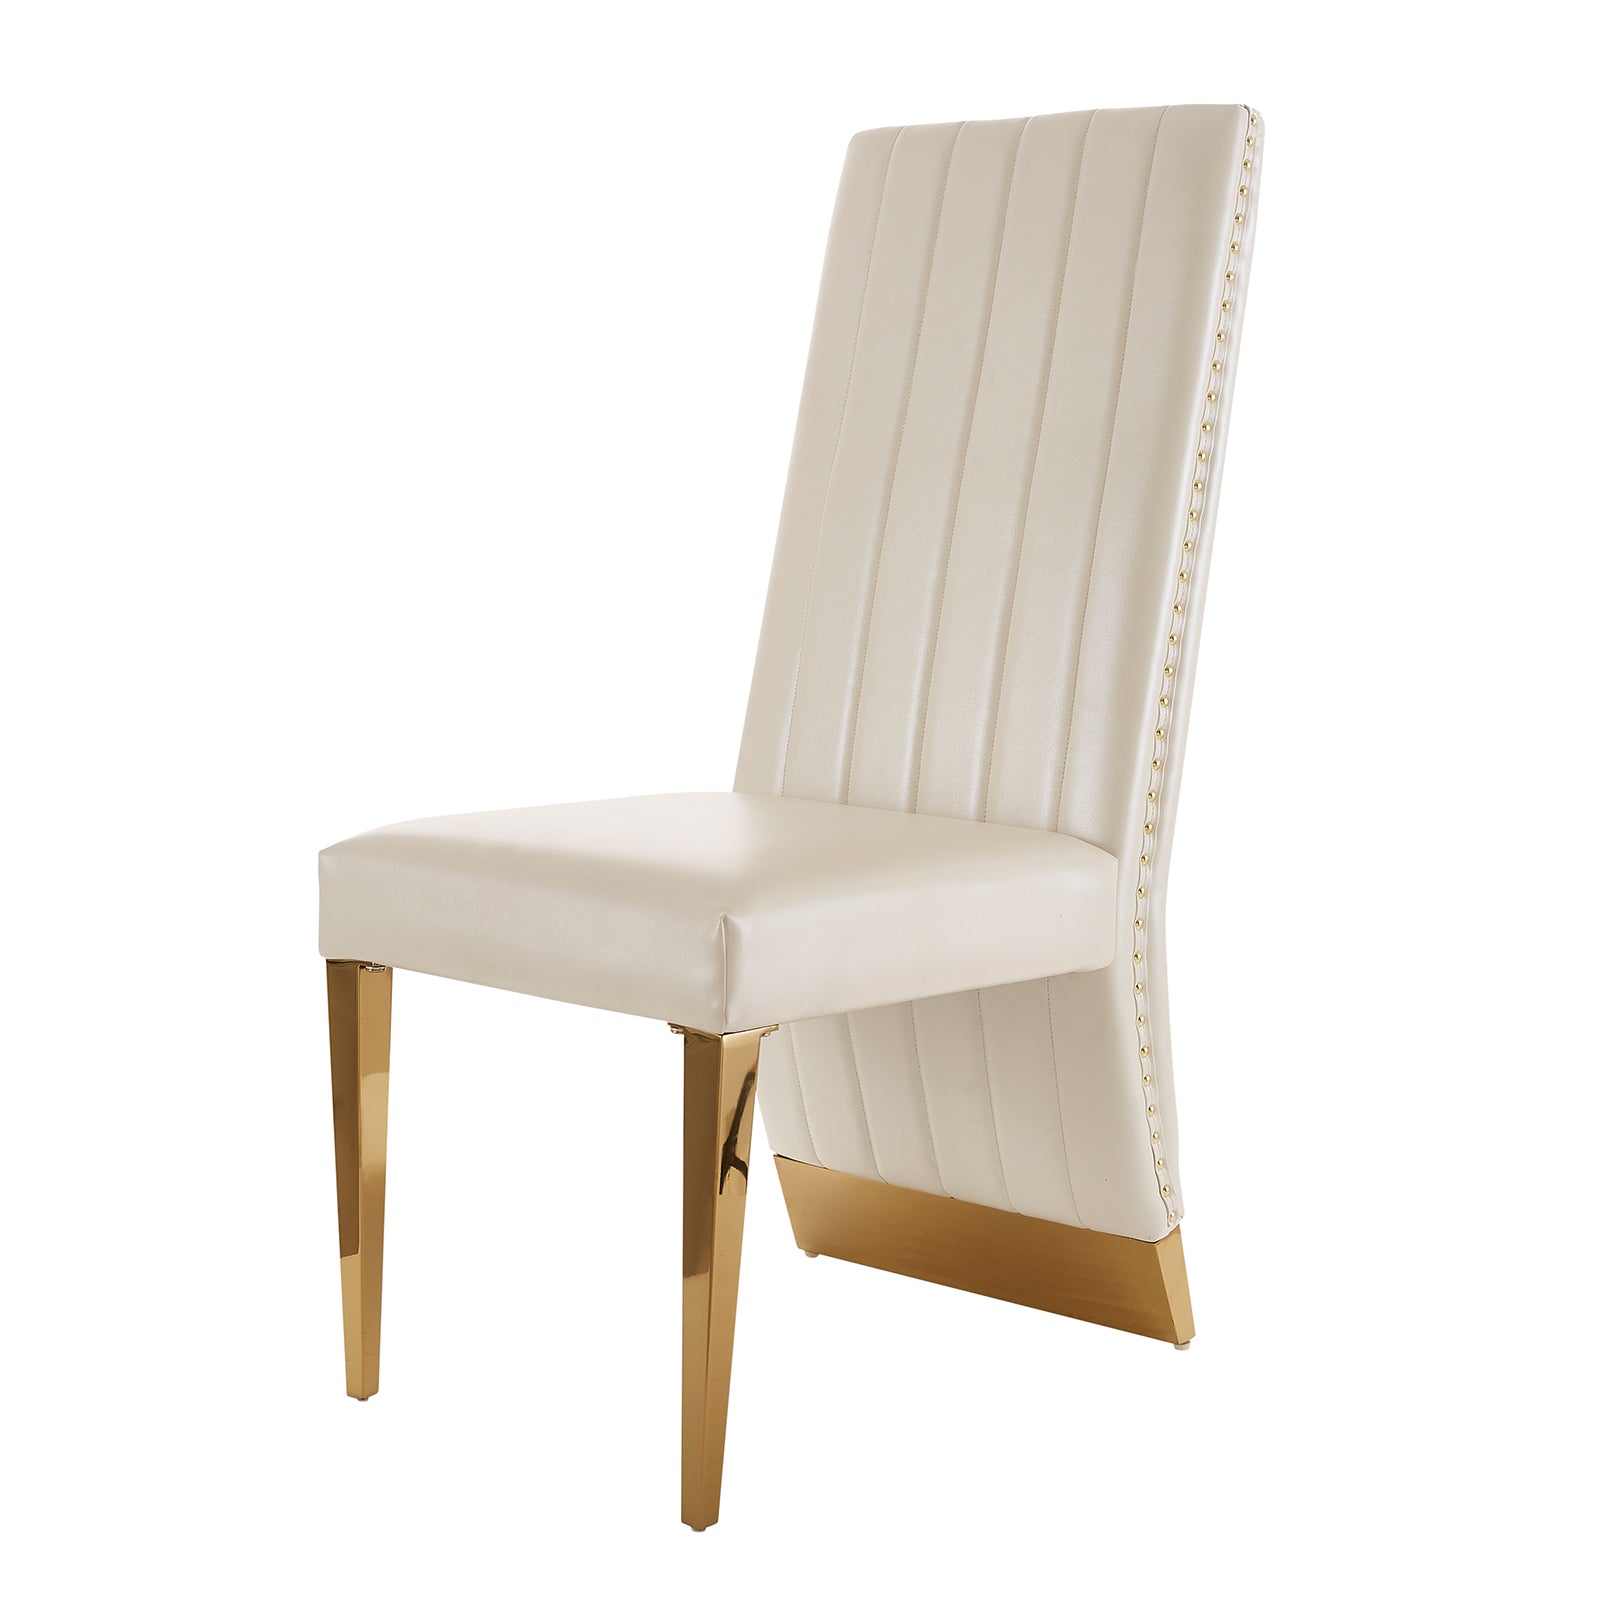 White leather Dining Chairs | Nailhead Trim | Metal gold legs | C159